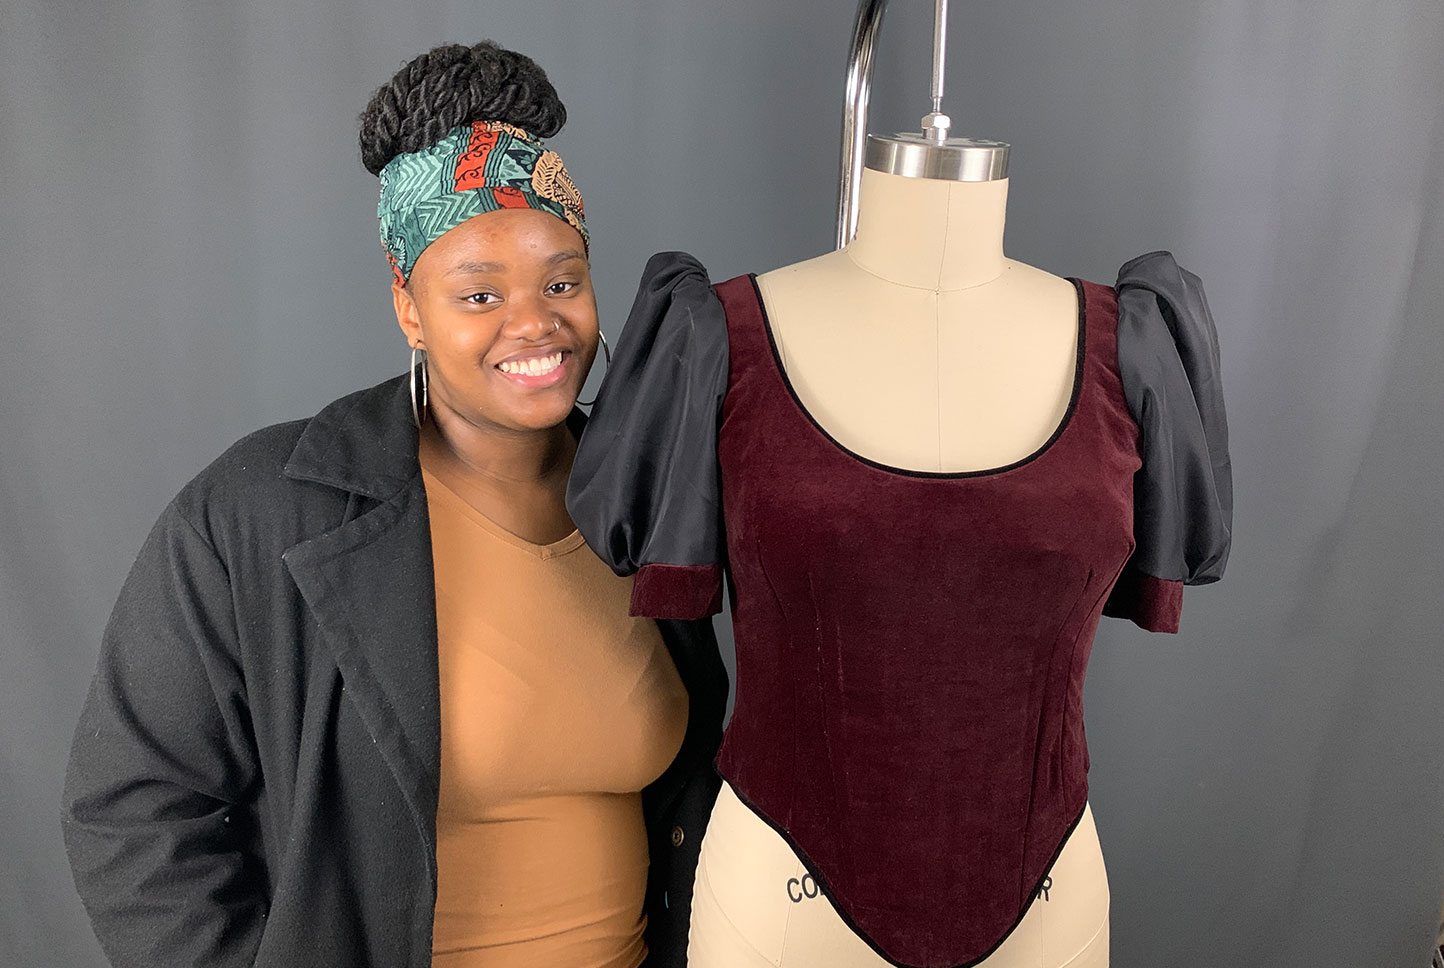 University of Louisiana at Lafayette acting student Imani Lecoq stands next to a costume she created for the theatre program